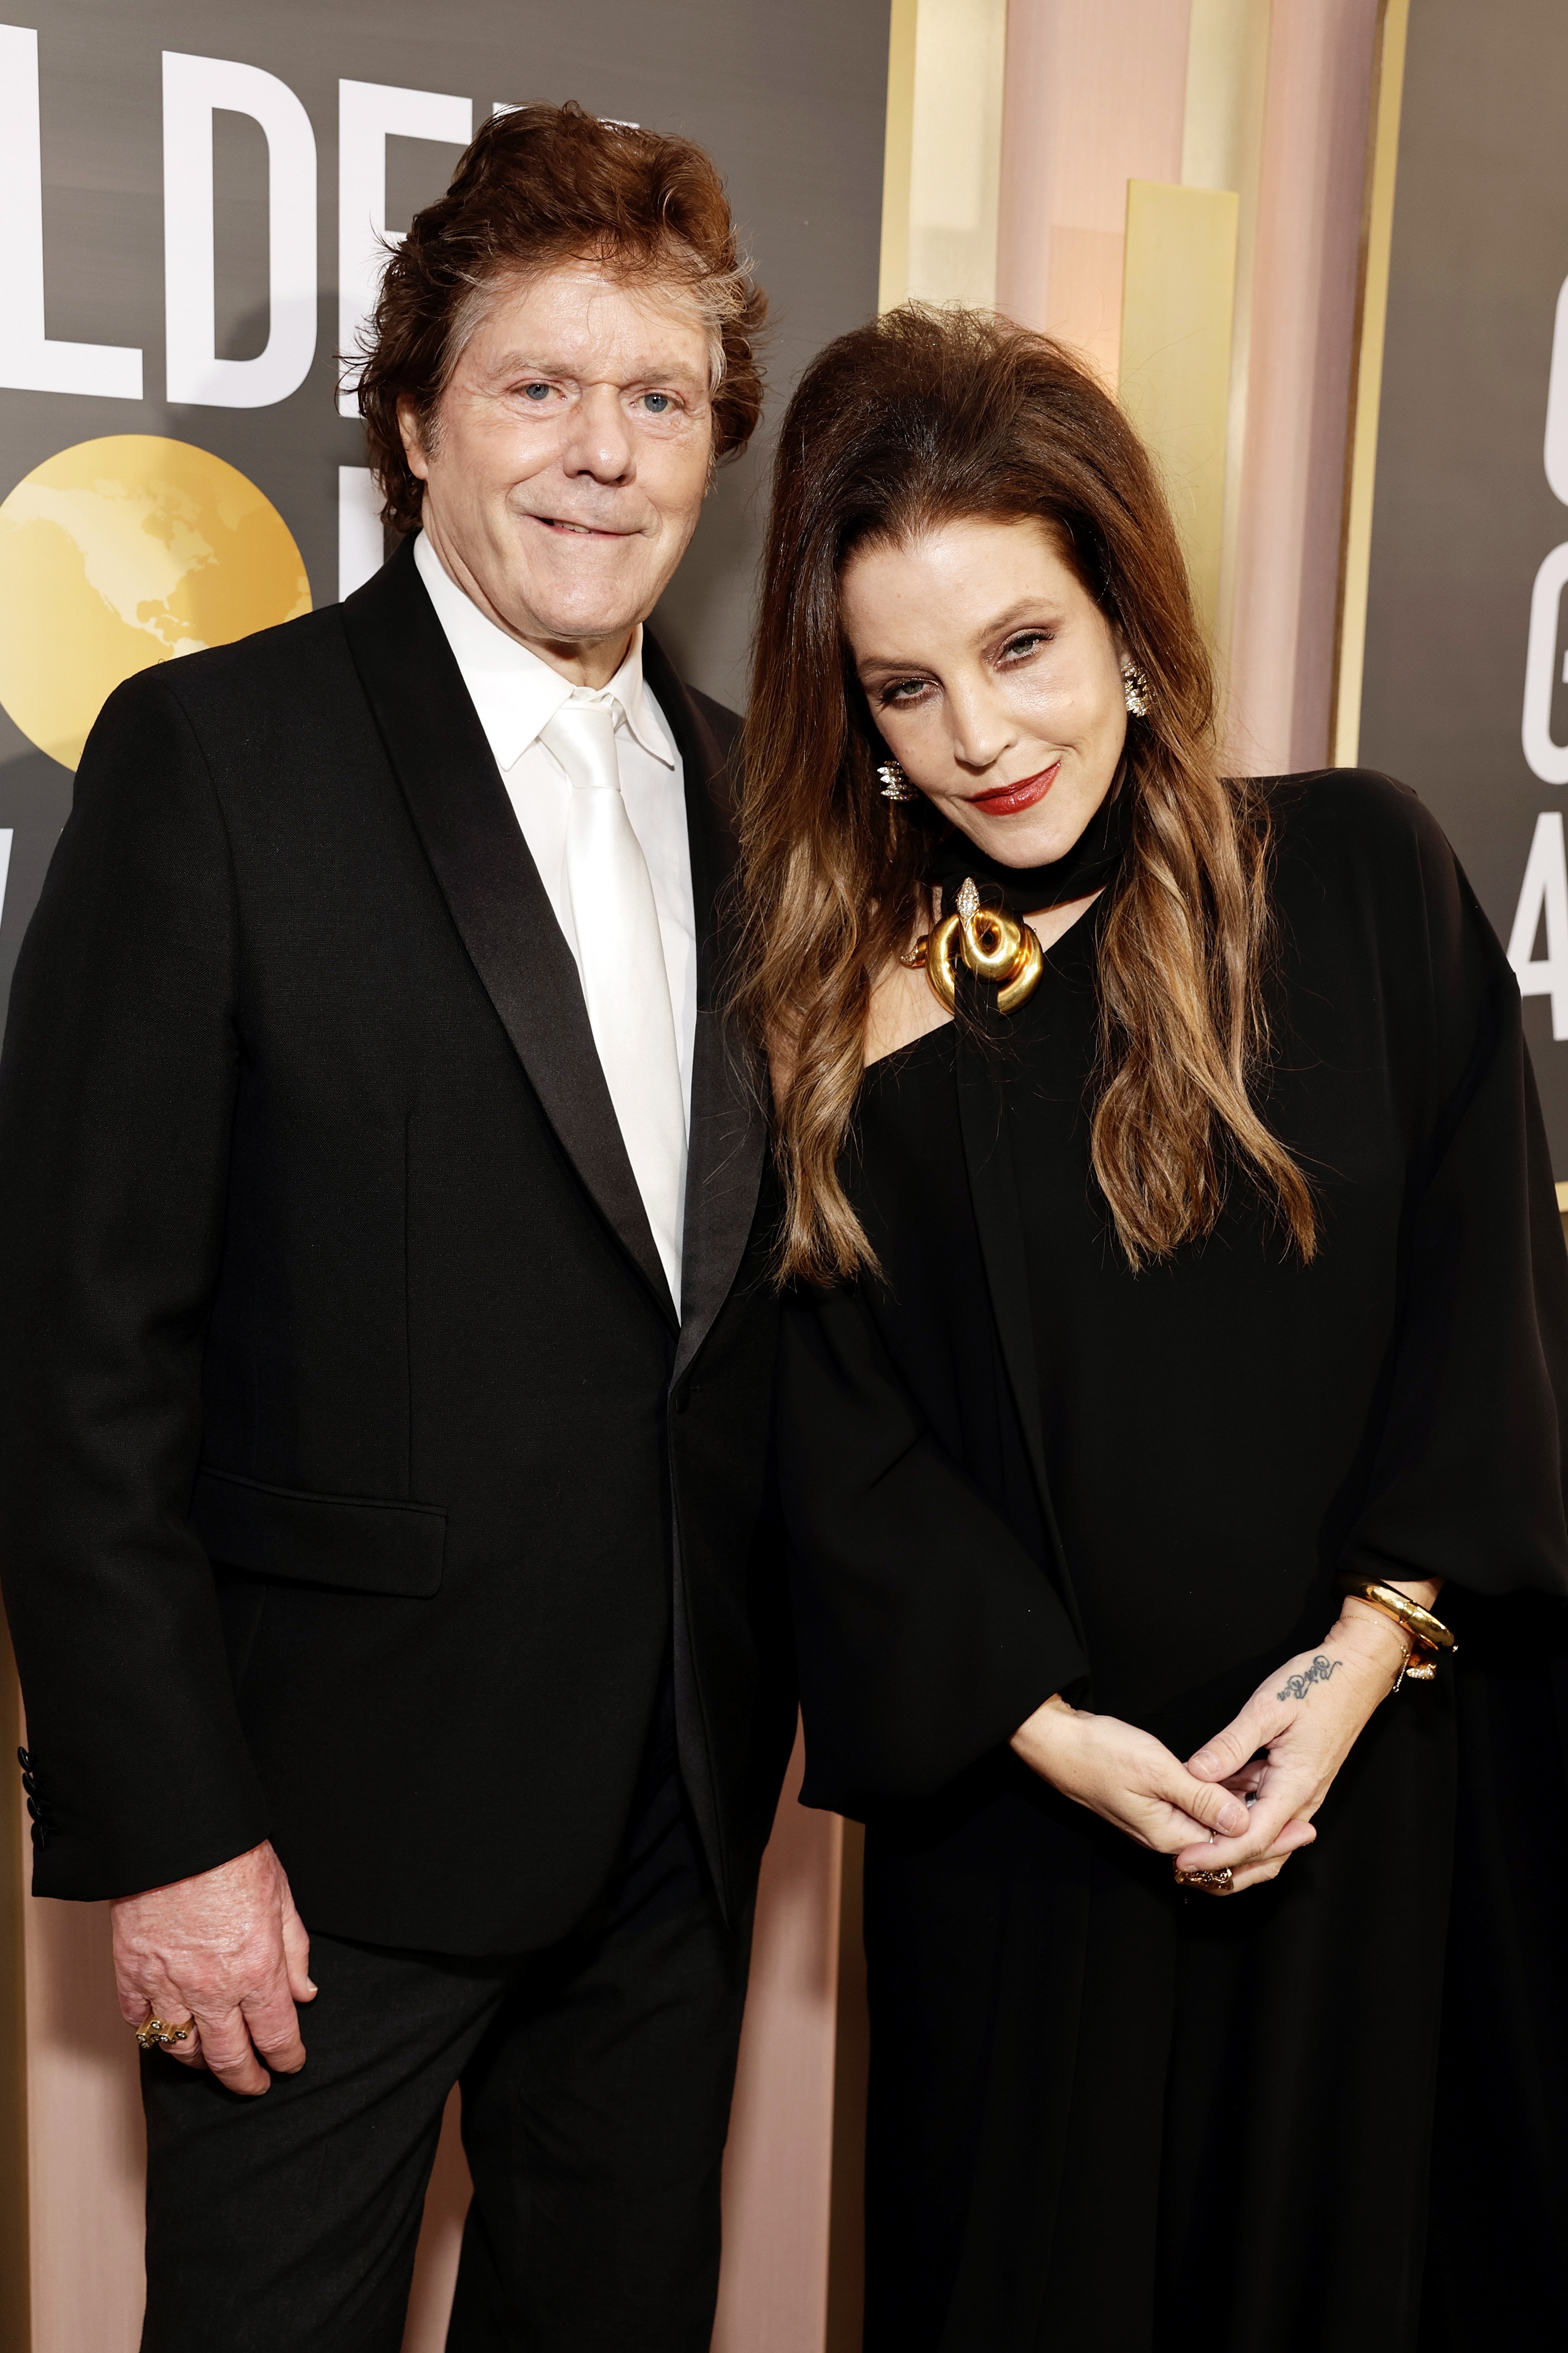 Jerry Schilling and Lisa Marie Presley arrive at the 80th Annual Golden Globe Awards held at the Beverly Hilton Hotel on January 10, 2023 in Beverly Hills, California | Source: Getty Images 